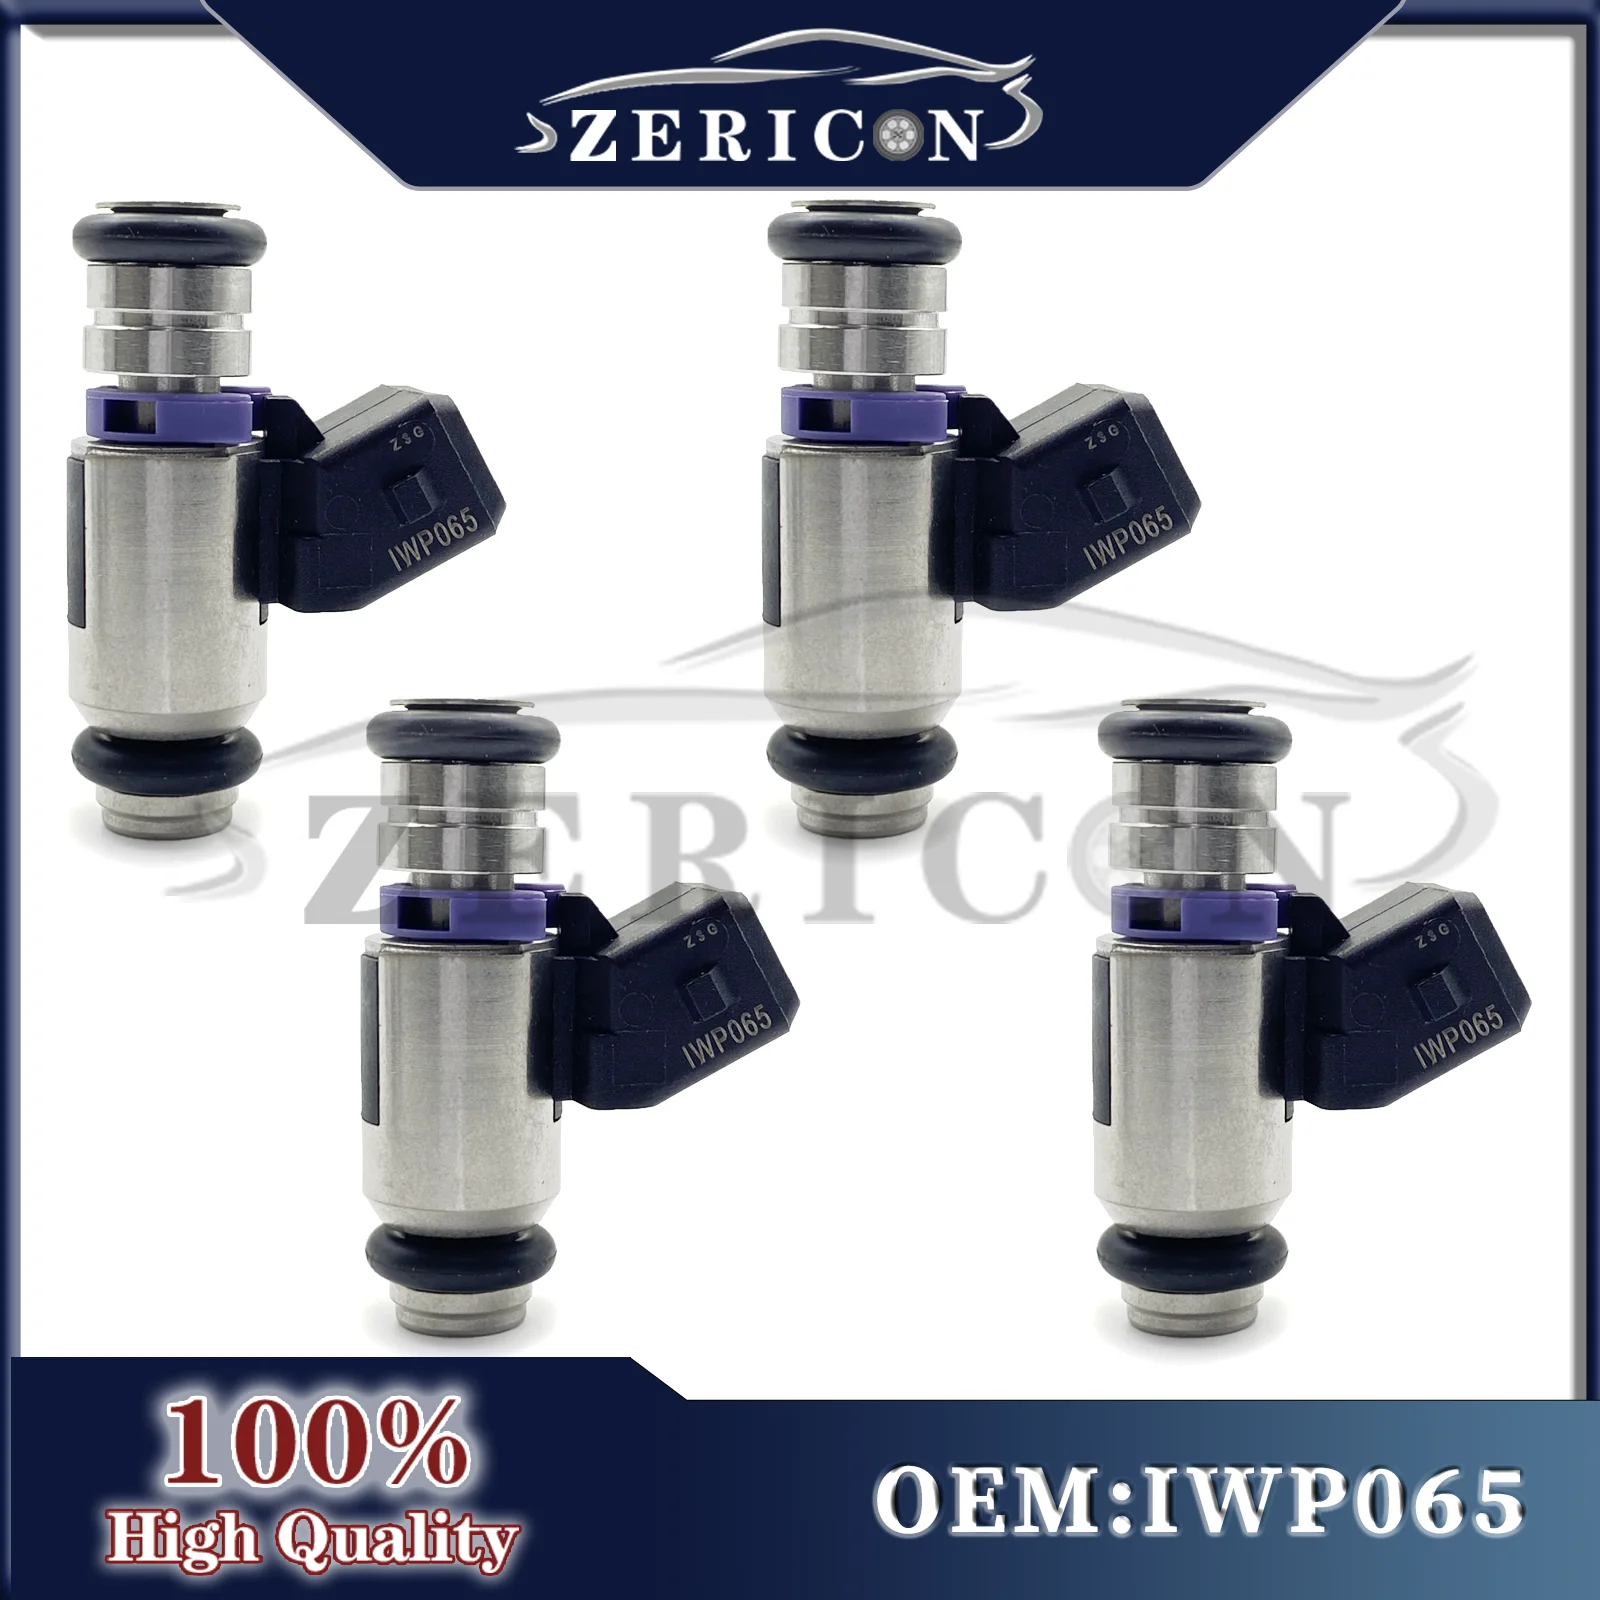 

4pcs IWP065 Brand New Fuel Injector Nozzle IWP-065 For Fiat Punto Seicento Magneti Marelli 7078993 50101302 46481318